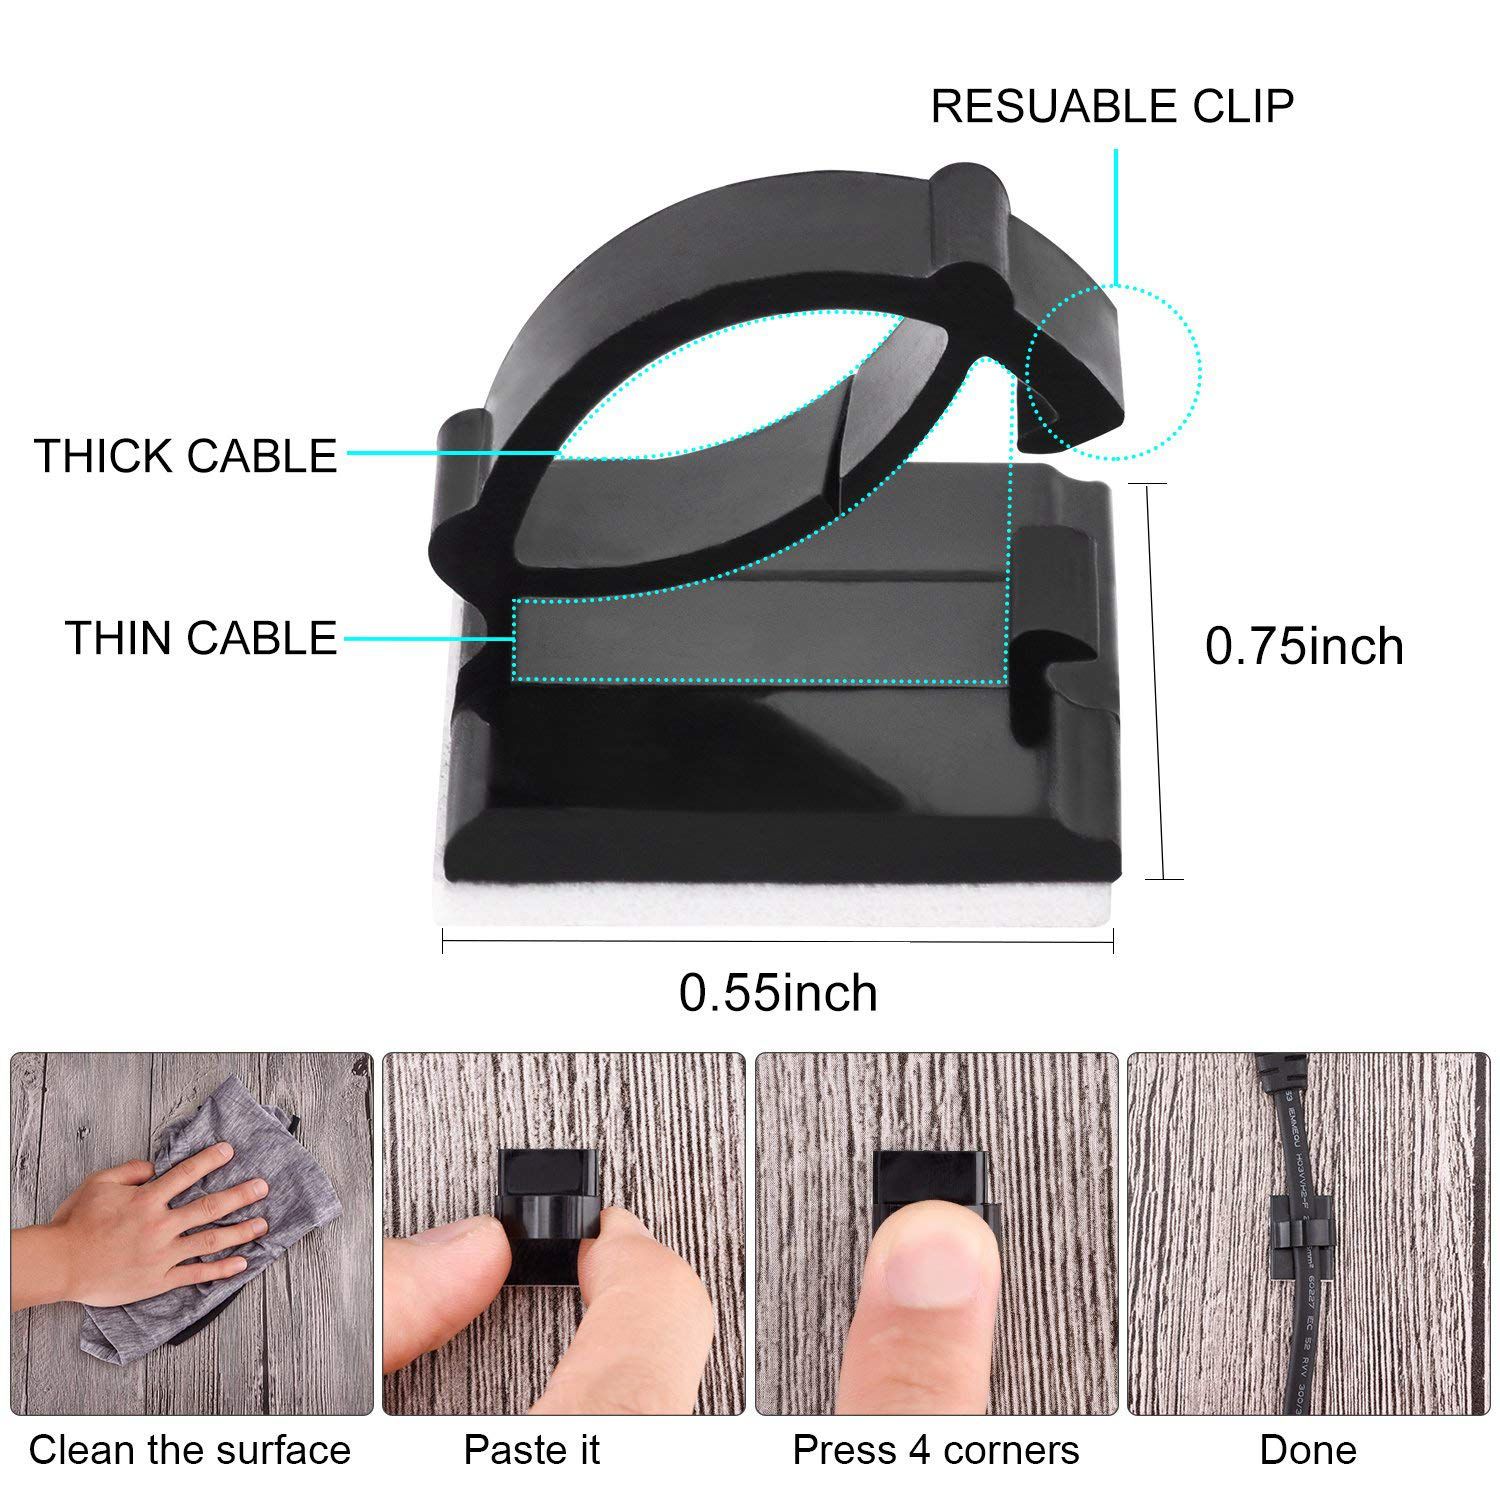 50 pcs Self Adhesive Cable Clamp Plastic Rectangular Cable Clips Cable Tie Quick Bind Cable Wire Cord Management Holder for Car